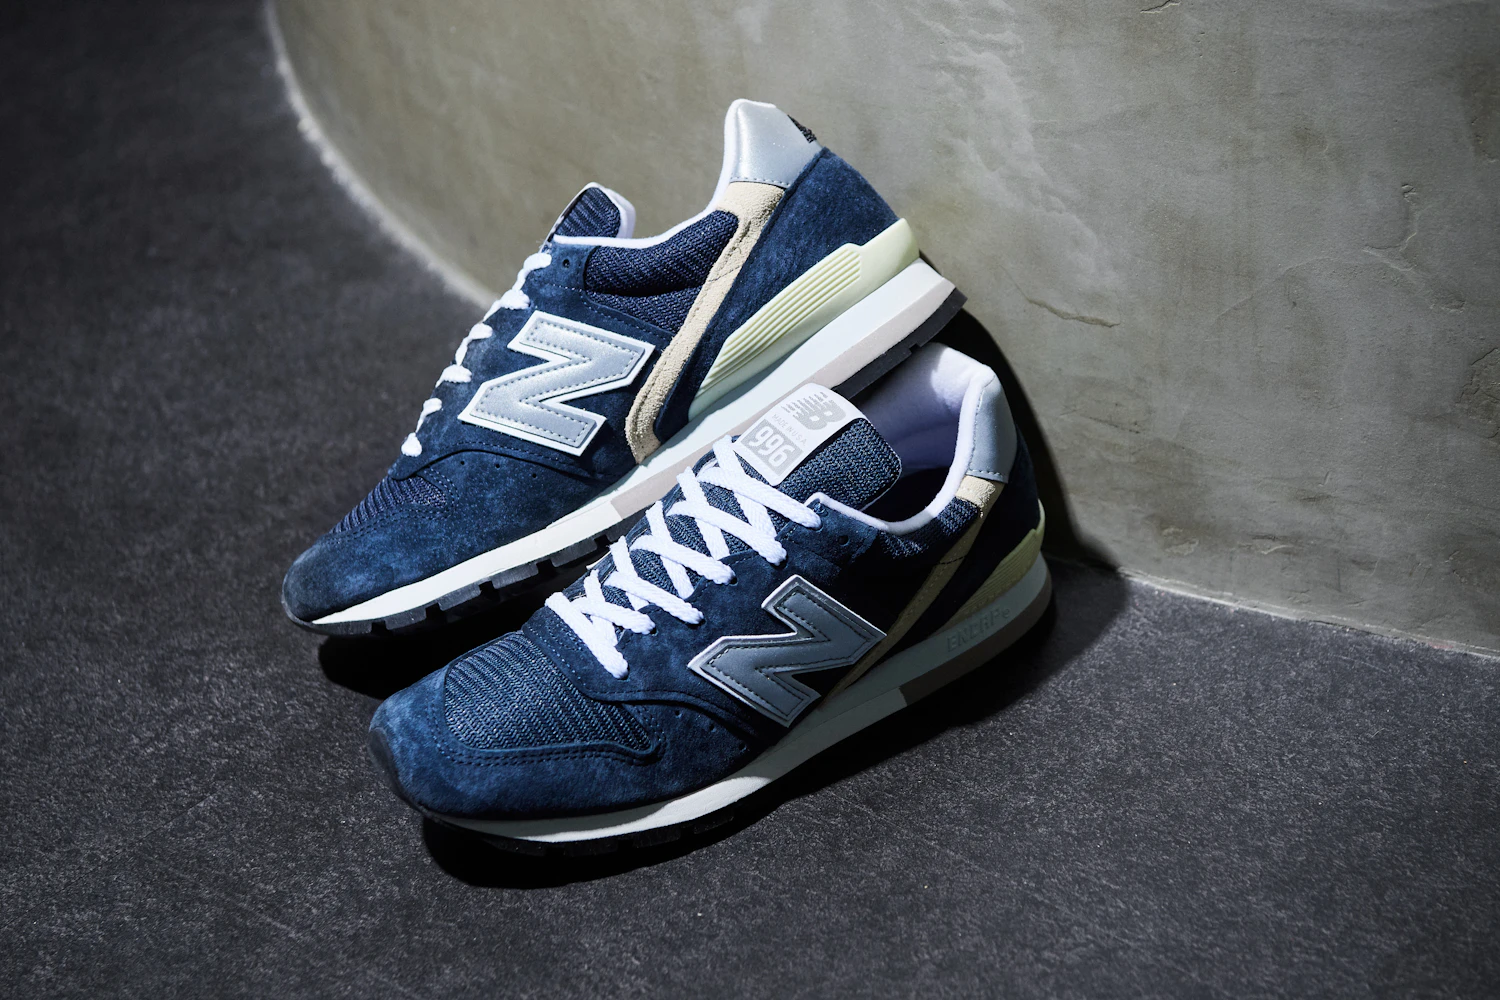 'U996' is a made in USA version that carries on the original design of the 'M996', featuring a combination of premium pigskin suede and mesh upper. It comes in both the classic gray and the popular navy color. Priced at 35,200 yen (tax included).